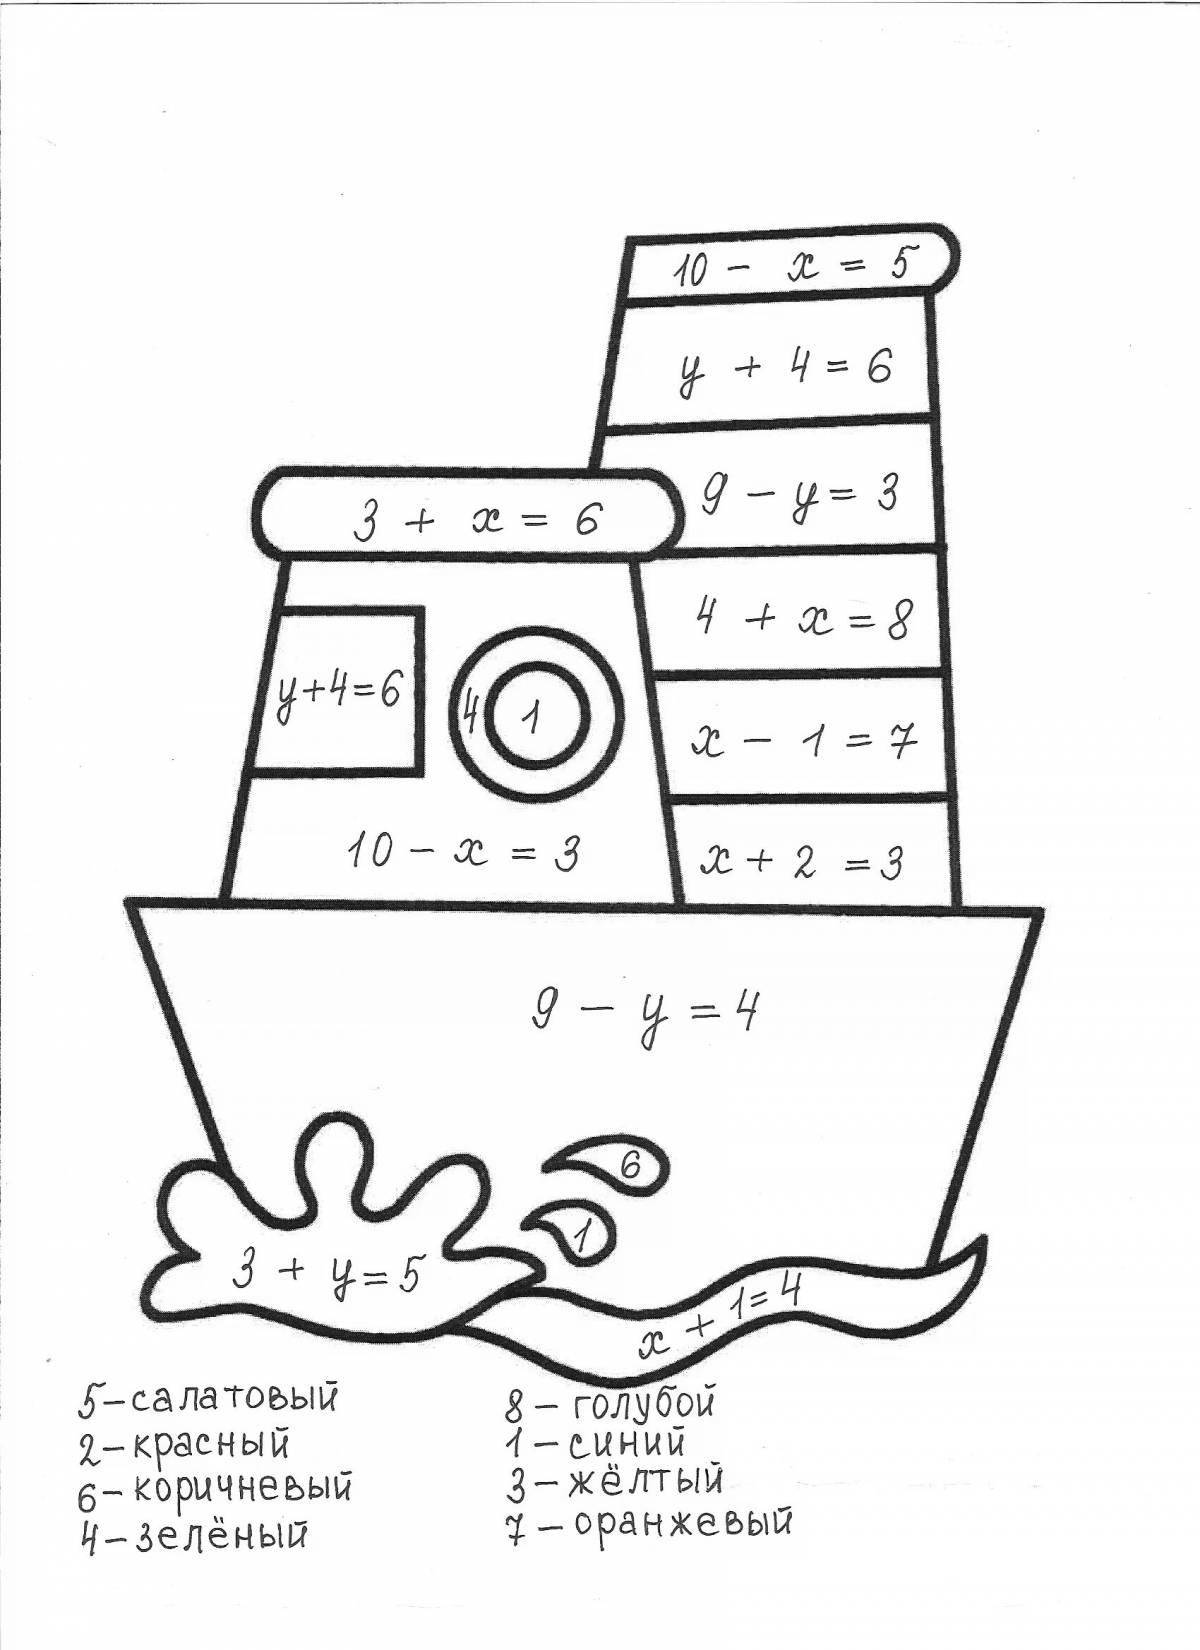 Coloring book funny math equations for 2nd grade